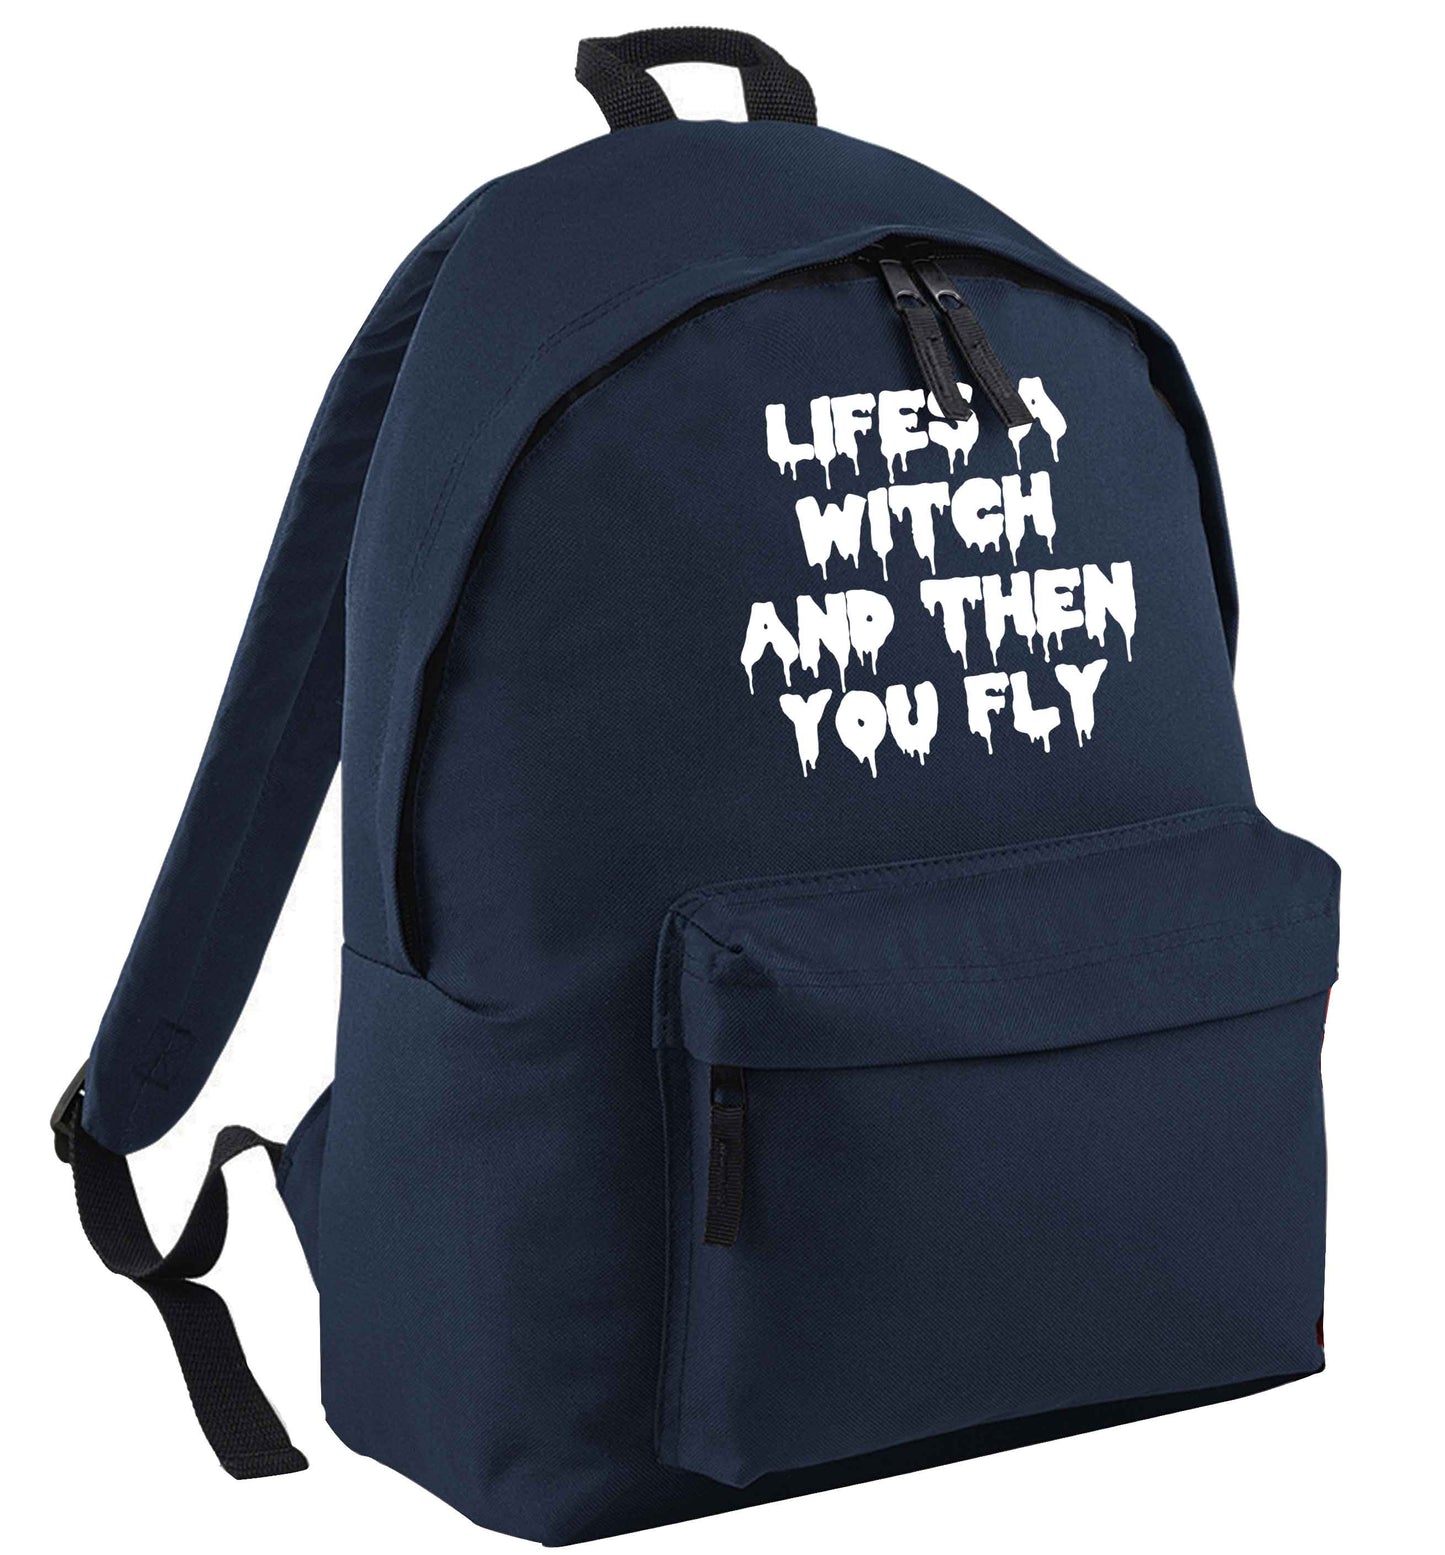 Life's a witch and then you fly navy adults backpack